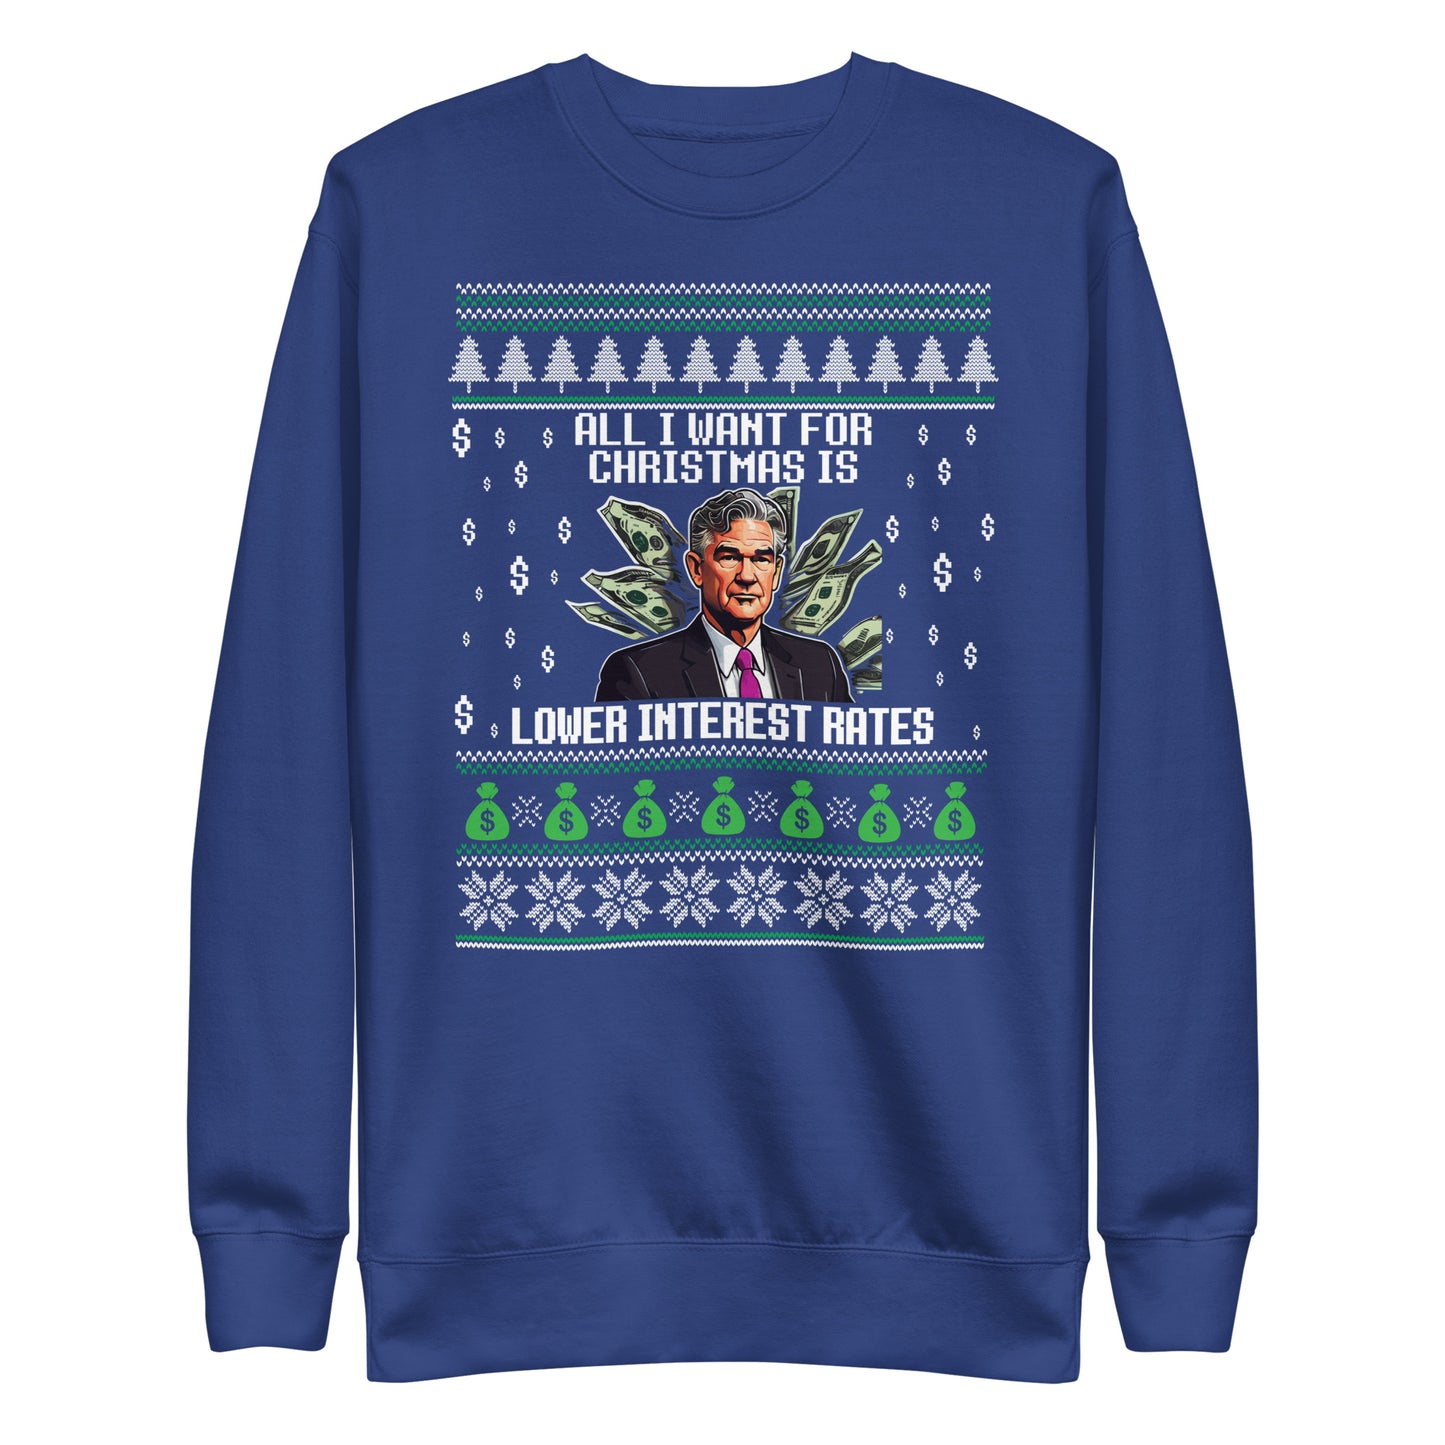 All I Want For Christmas is Lower Interest Rates - Ugly Christmas Sweater -old